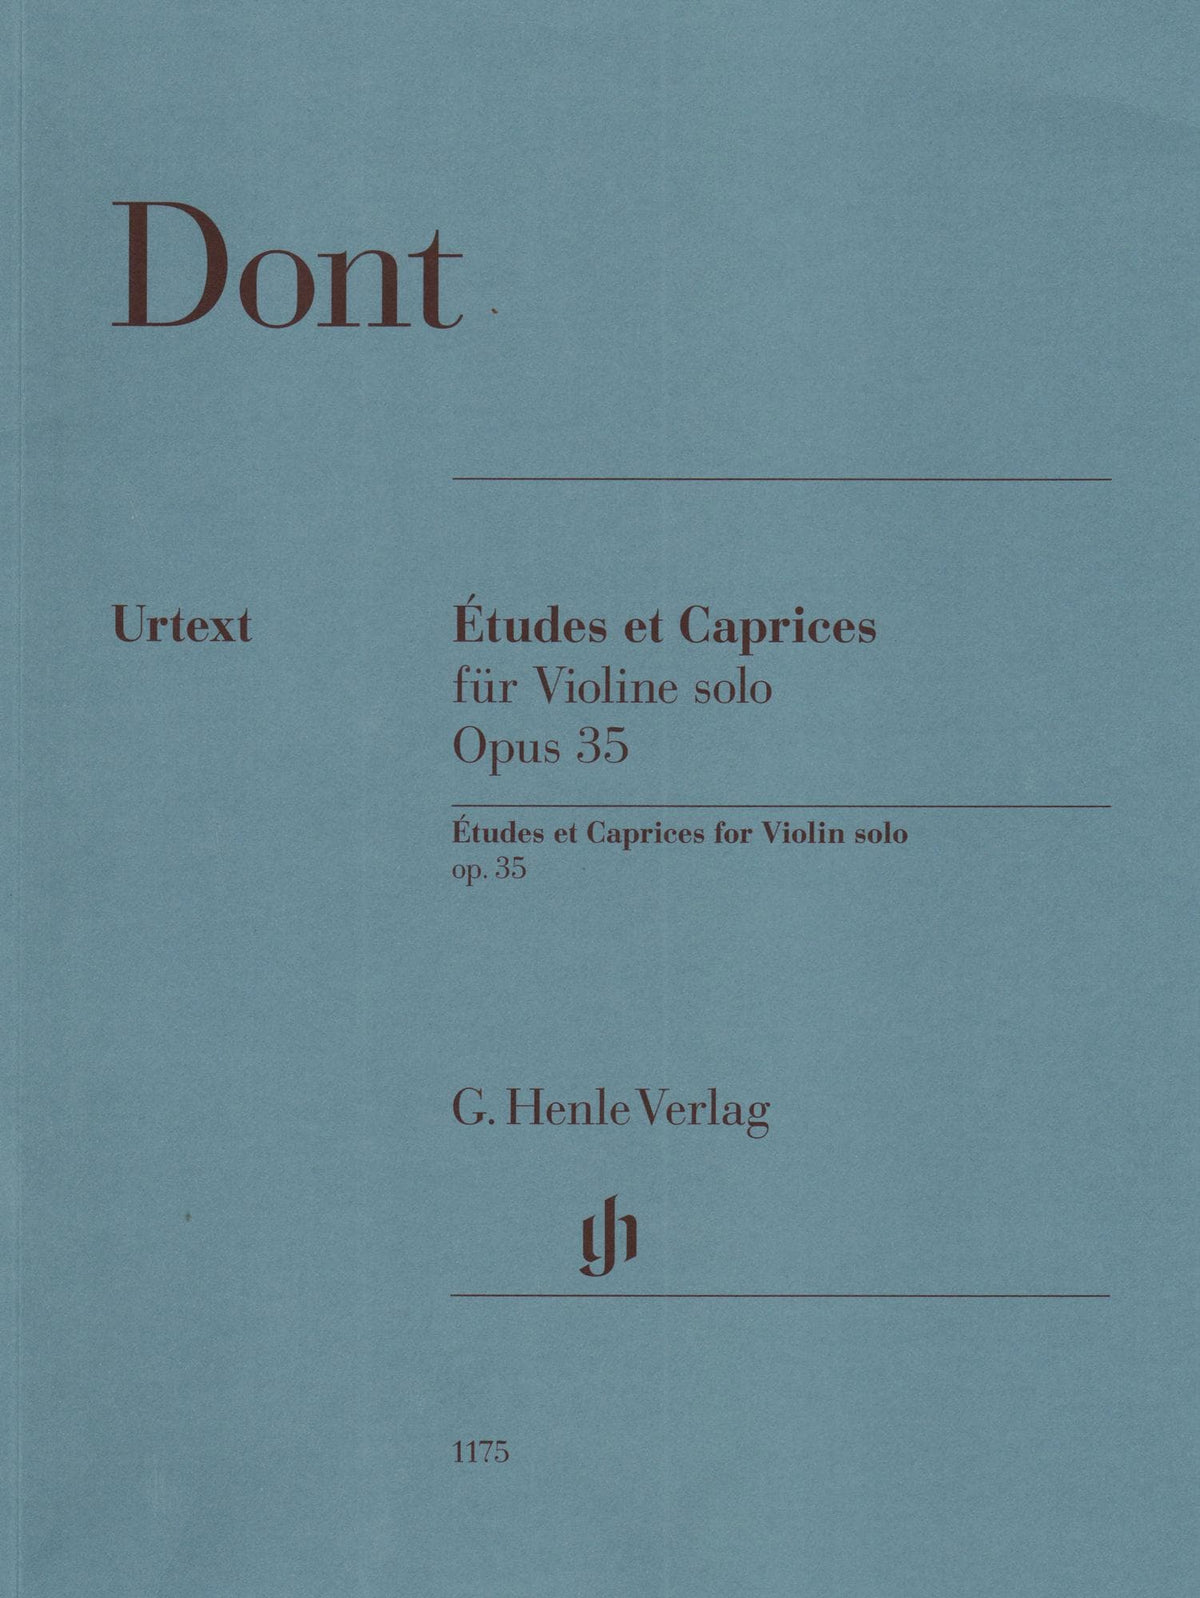 Dont, Jakob - 24 Etudes and Caprices Op 35 - Violin solo - edited by Dominik Rahmer - G Henle Verlag URTEXT